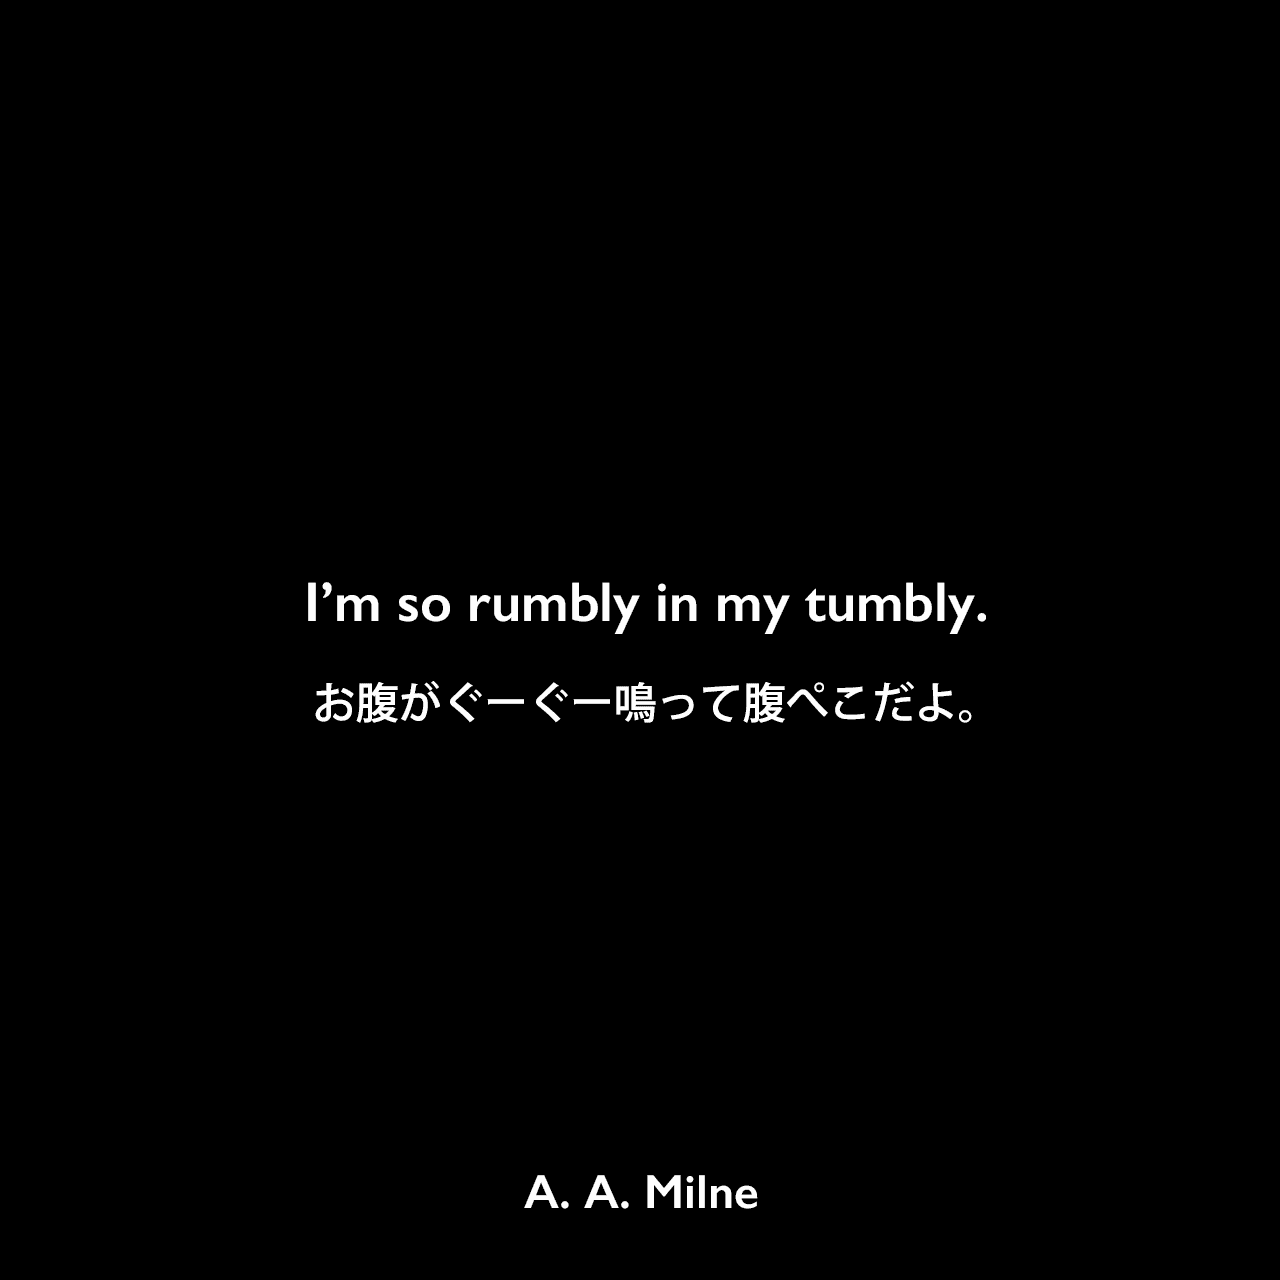 I’m so rumbly in my tumbly.お腹がぐーぐー鳴って腹ぺこだよ。A. A. Milne